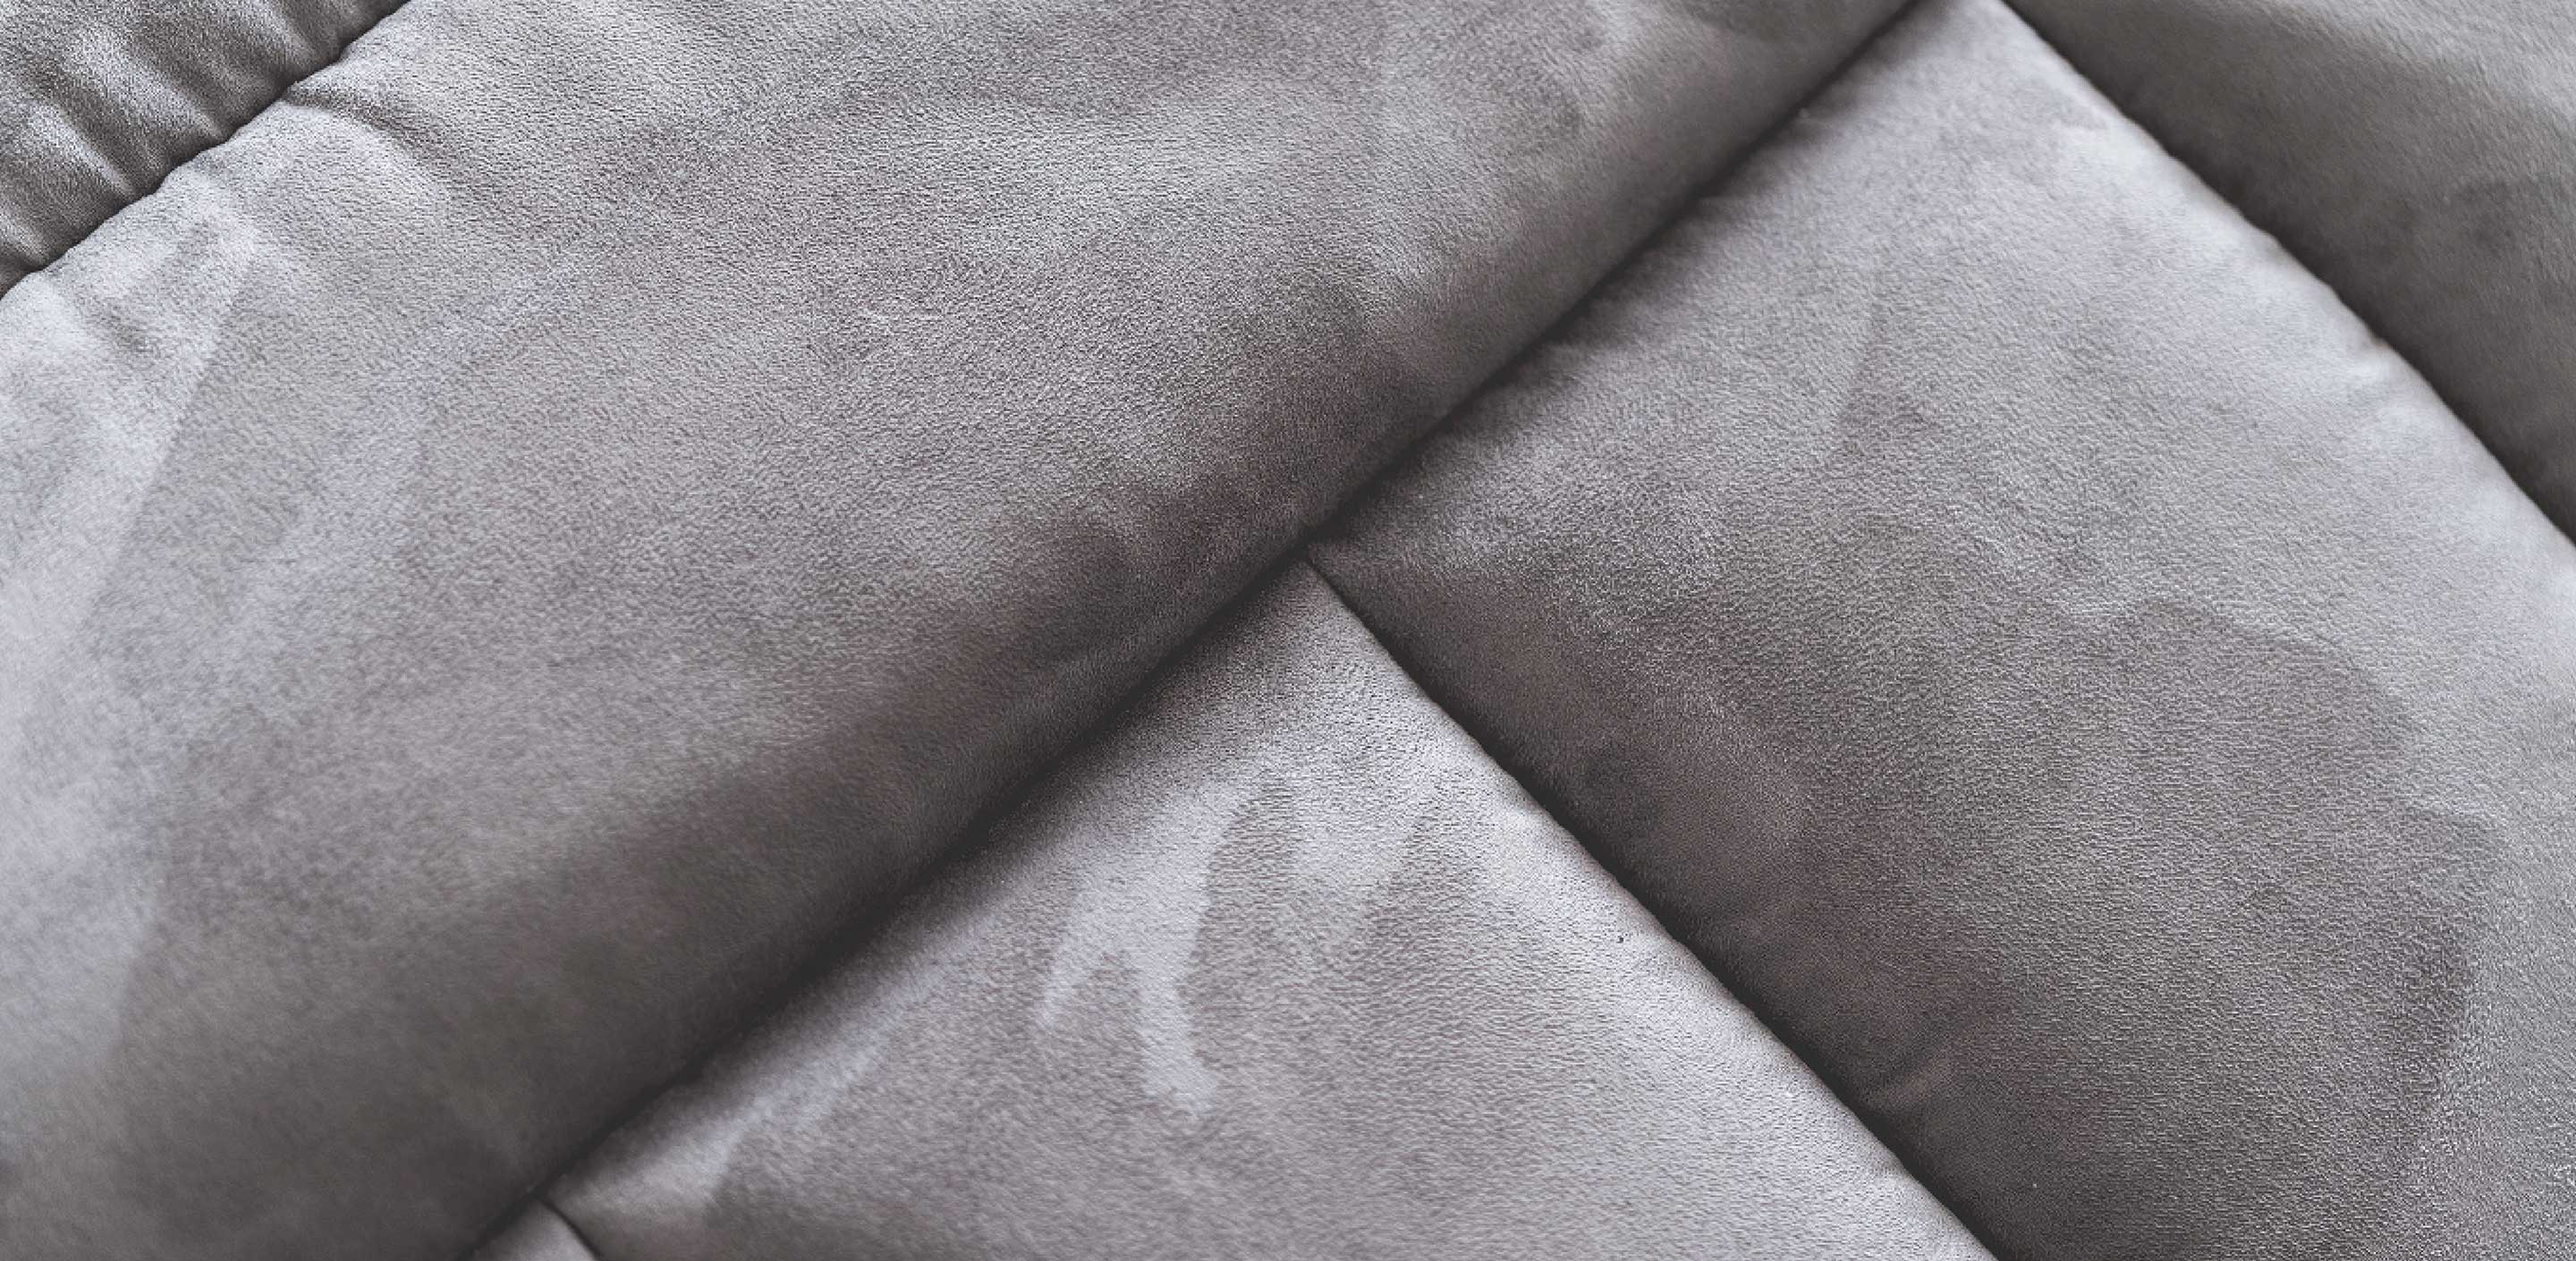 Alcantara Fabric: What You Need to Know